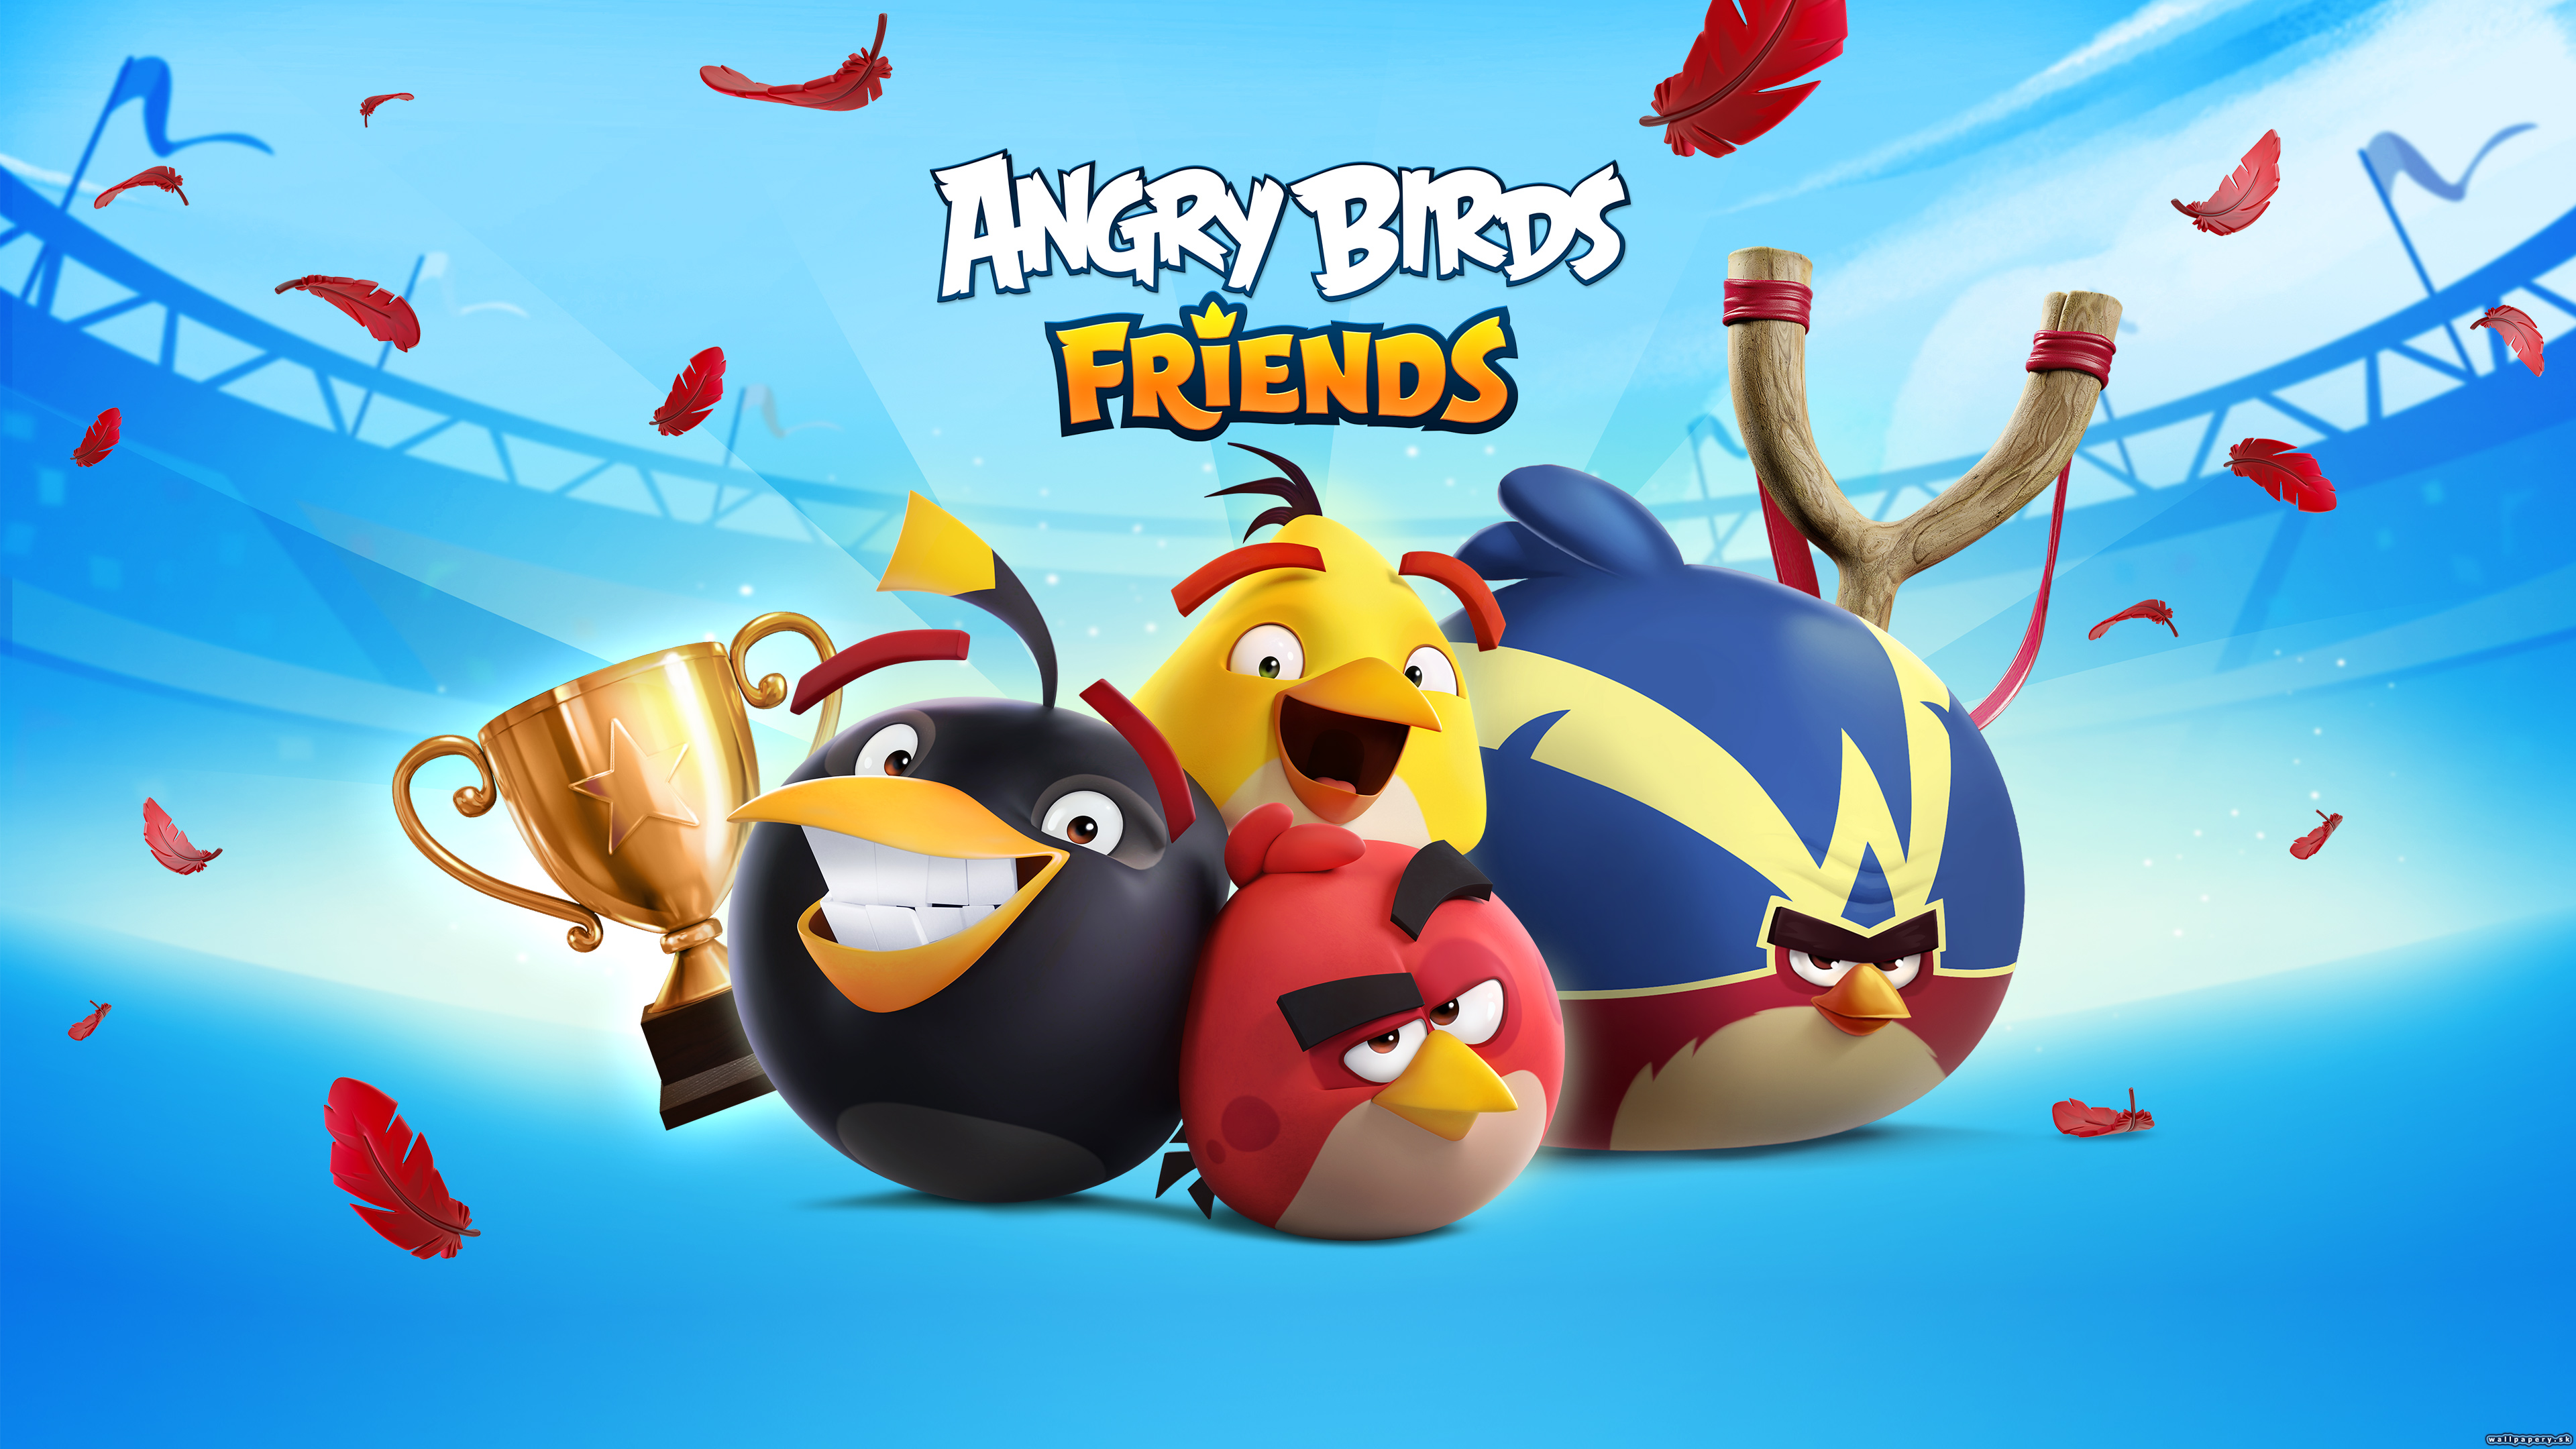 Angry Birds Friends - wallpaper 1